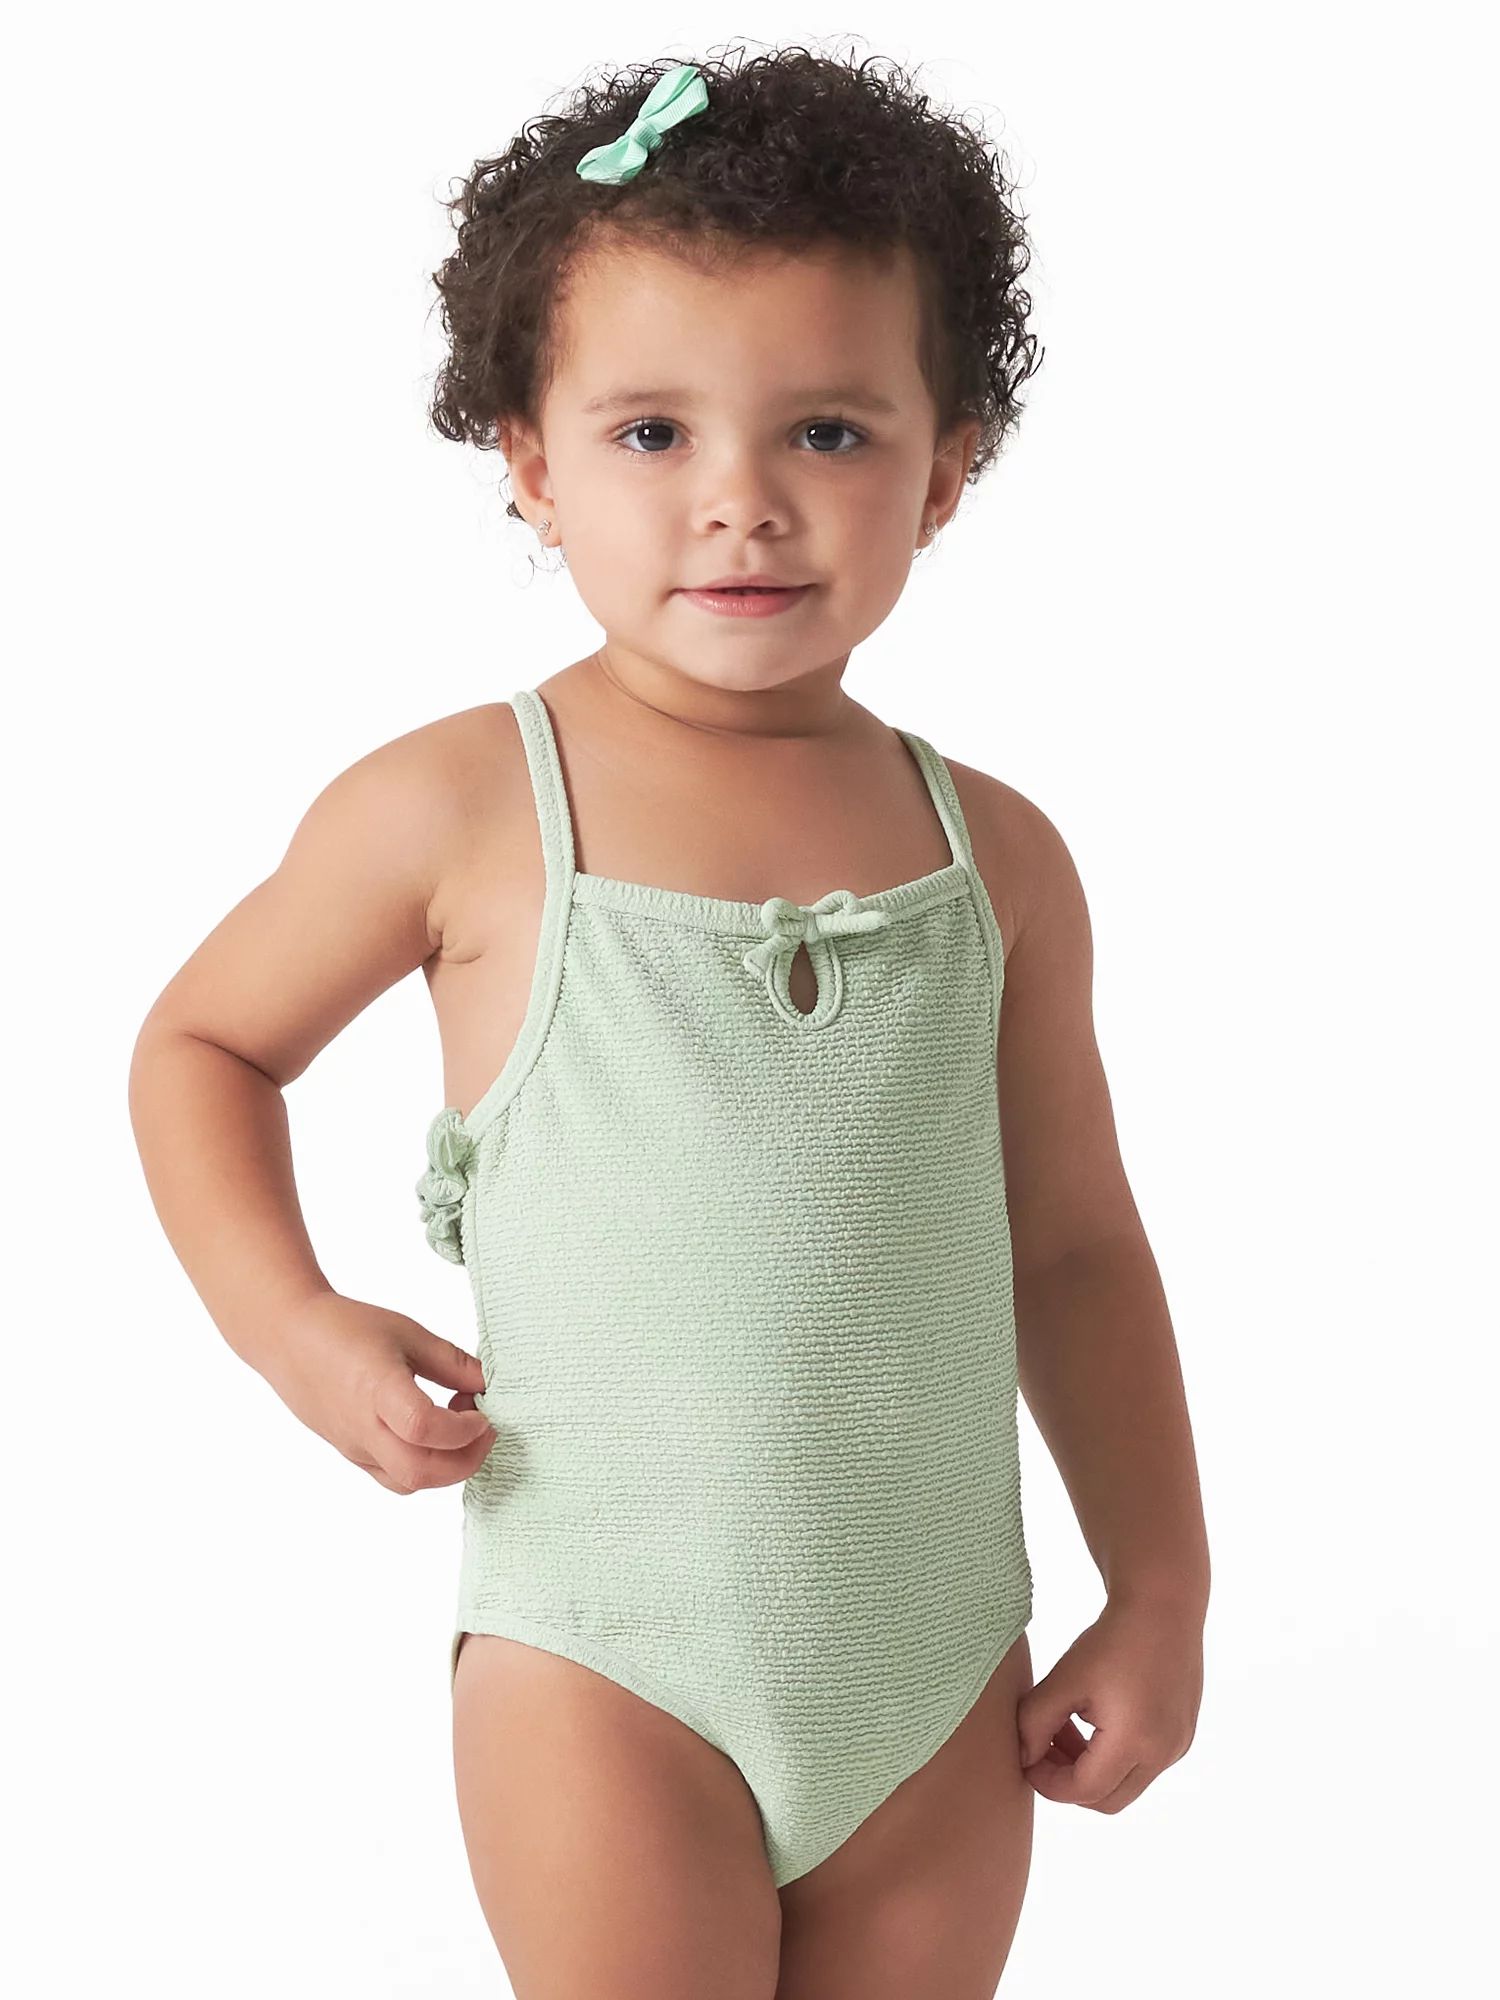 Modern Moments by Gerber Baby and Toddler Girls One Piece Swimsuit with UPF 50+, Sizes 12M-5T | Walmart (US)